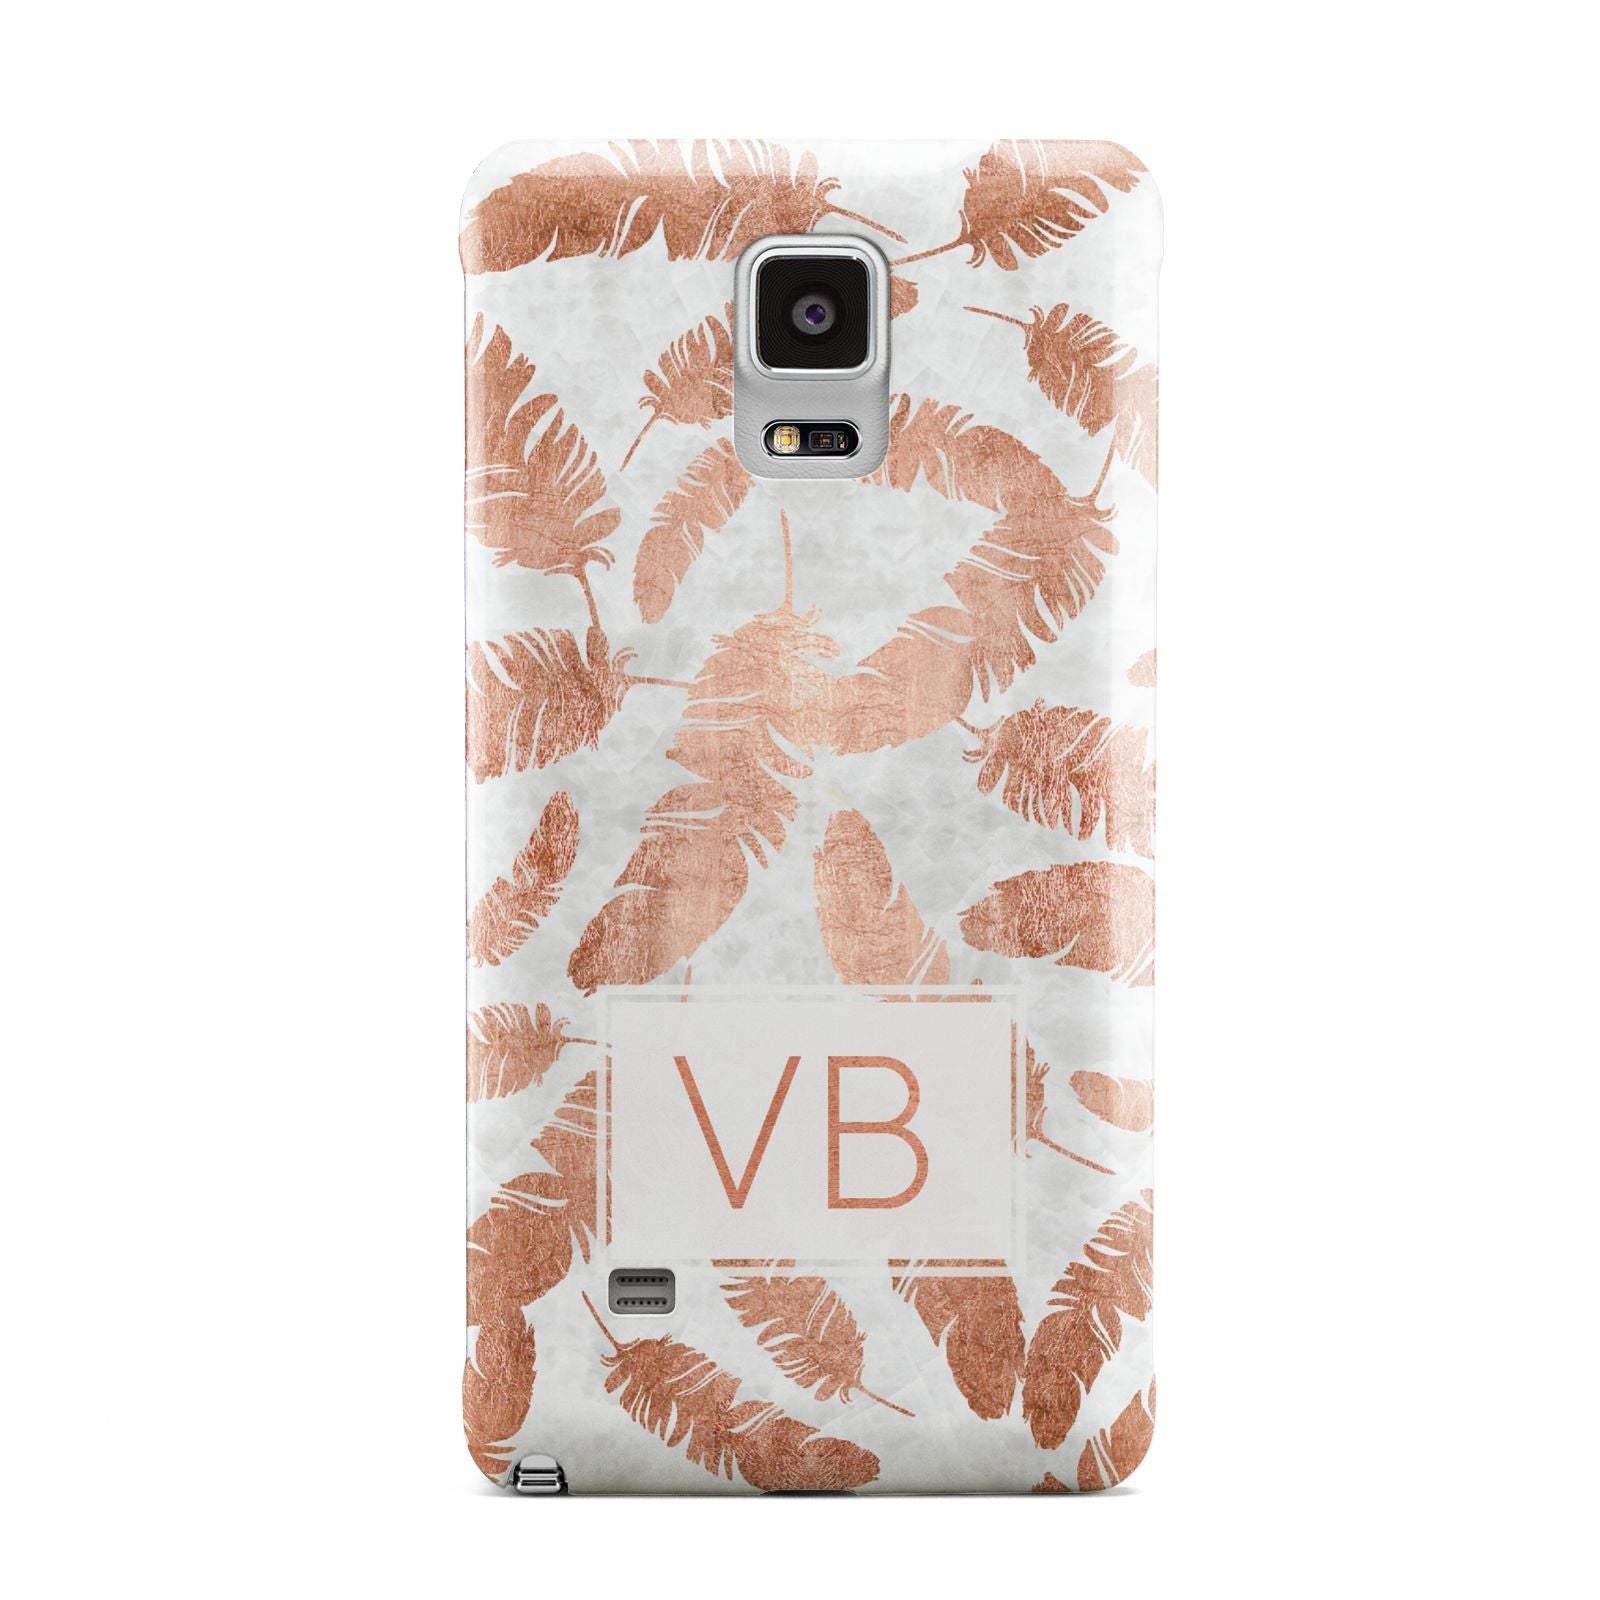 Personalised Leaf Marble Initials Samsung Galaxy Note 4 Case